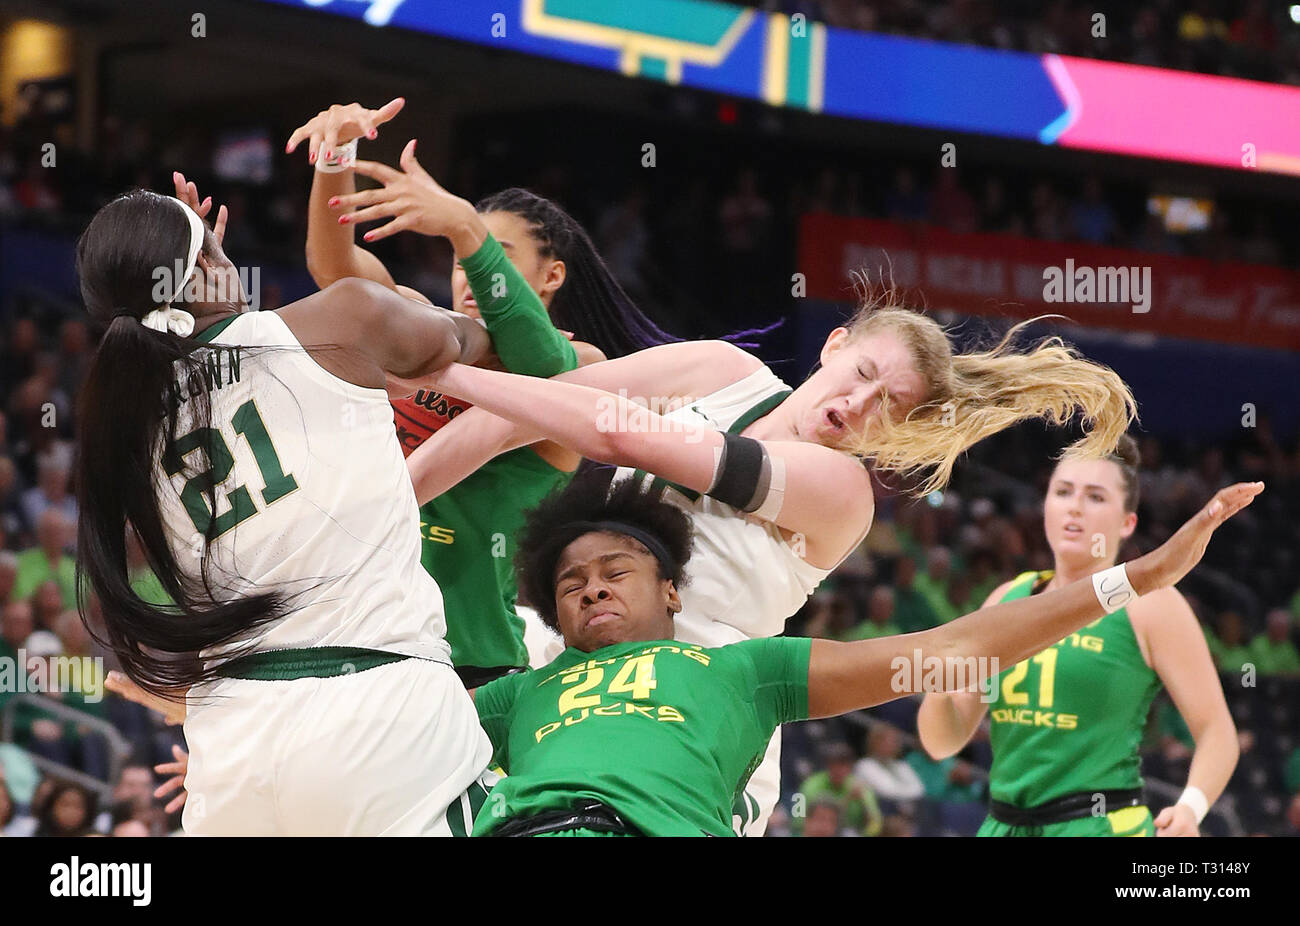 City, Florida, USA. 5th Apr, 2019. MONICA HERNDON | Times .Baylor Lady Bears and Oregon Ducks battle for the ball during the first half in the NCAA Women's Final Four semifinal game at the Amalie Arena on Friday, April 5, 2019. Credit: Monica Herndon/Tampa Bay Times/ZUMA Wire/Alamy Live News Stock Photo